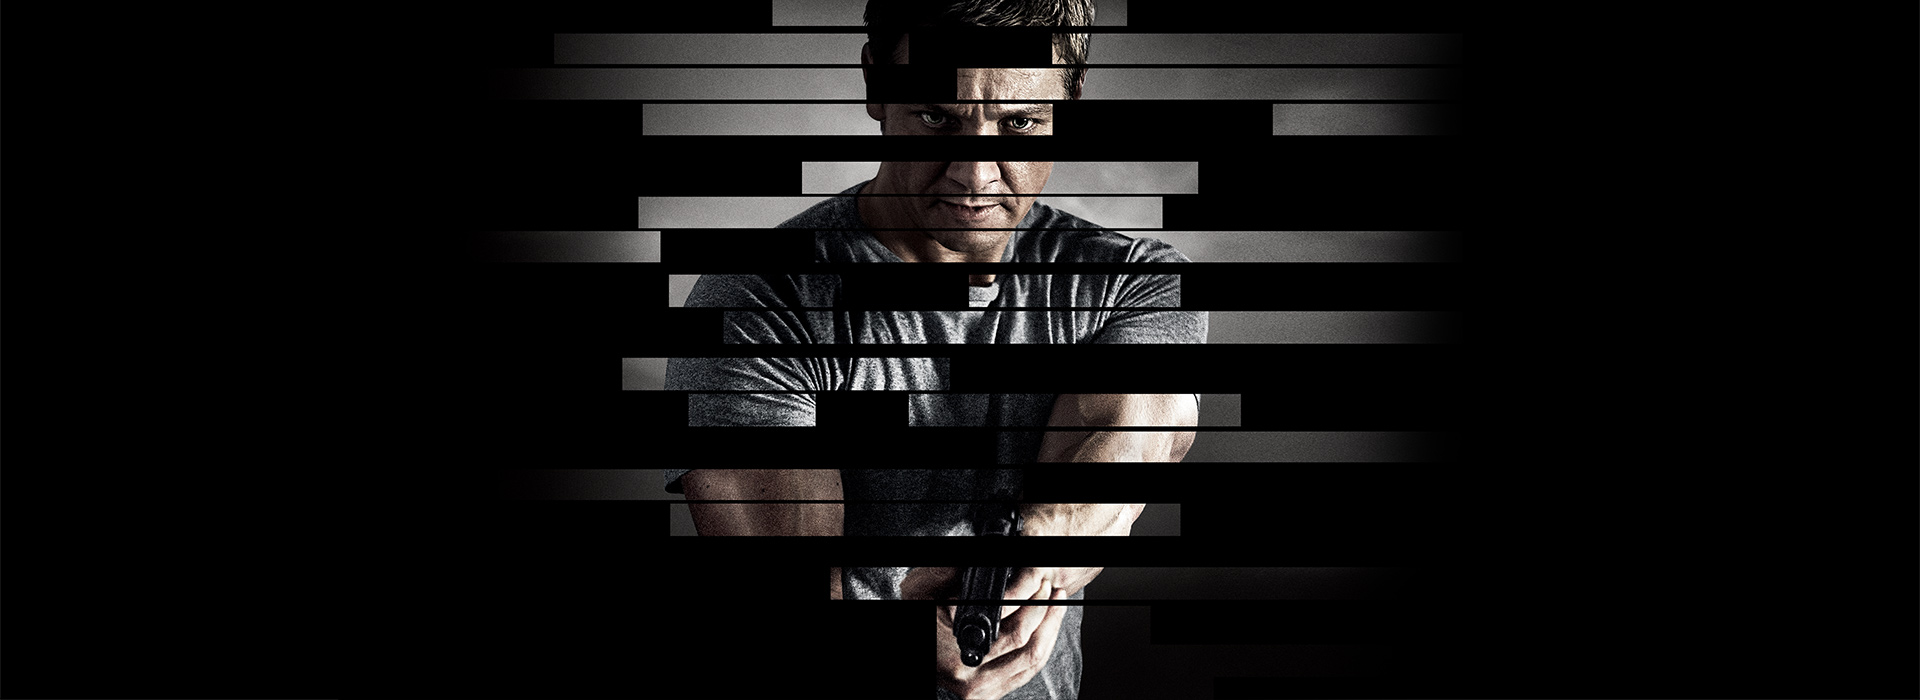 Movie poster The Bourne Legacy